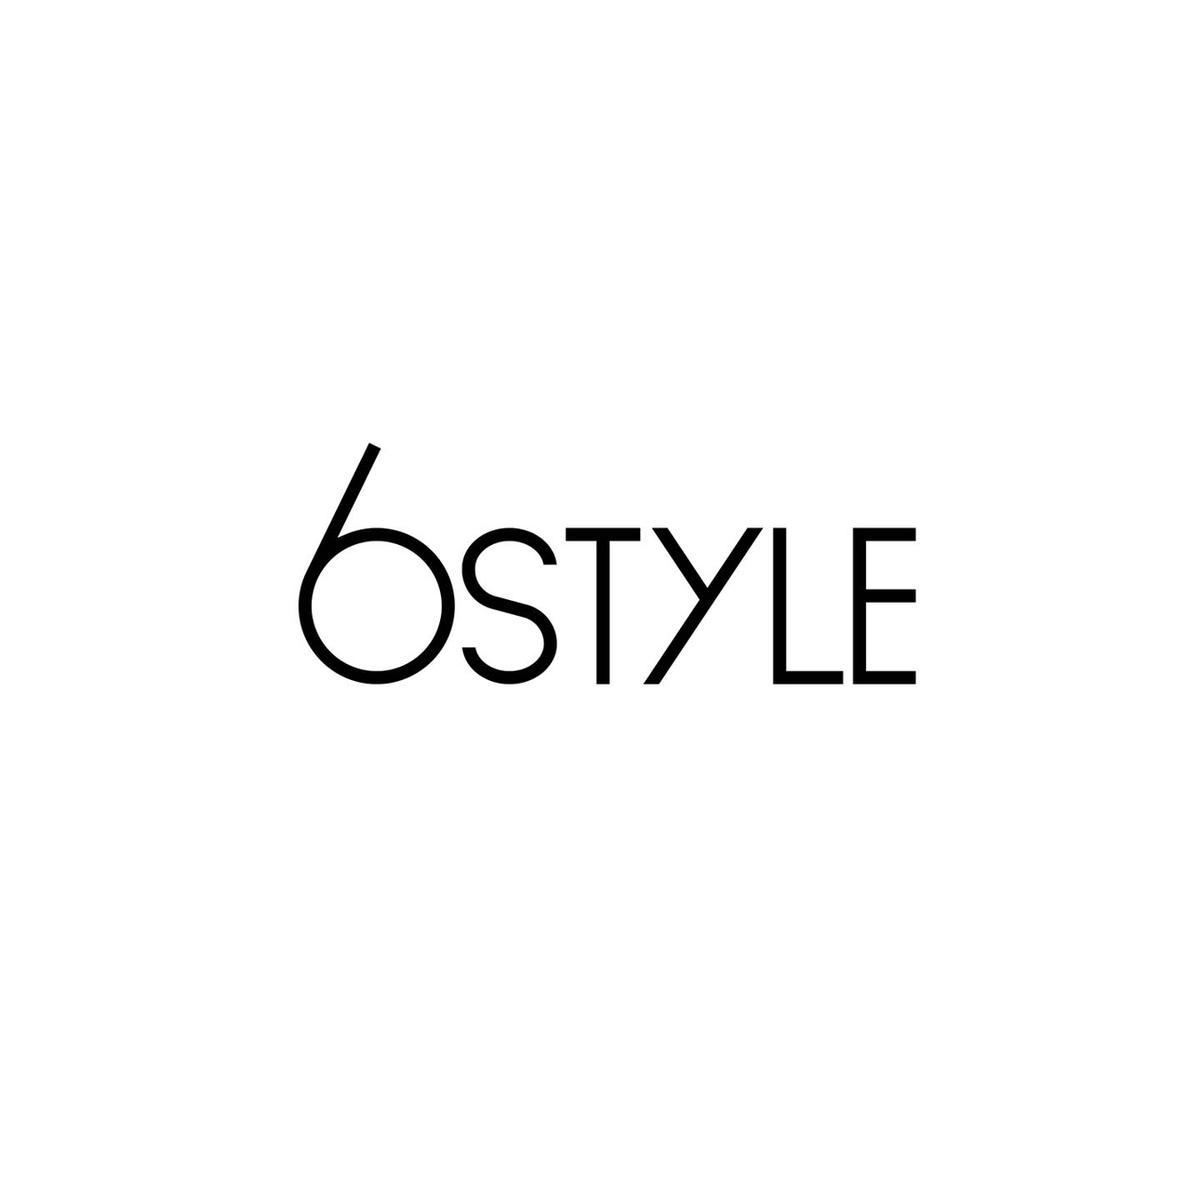 6STYLE's images